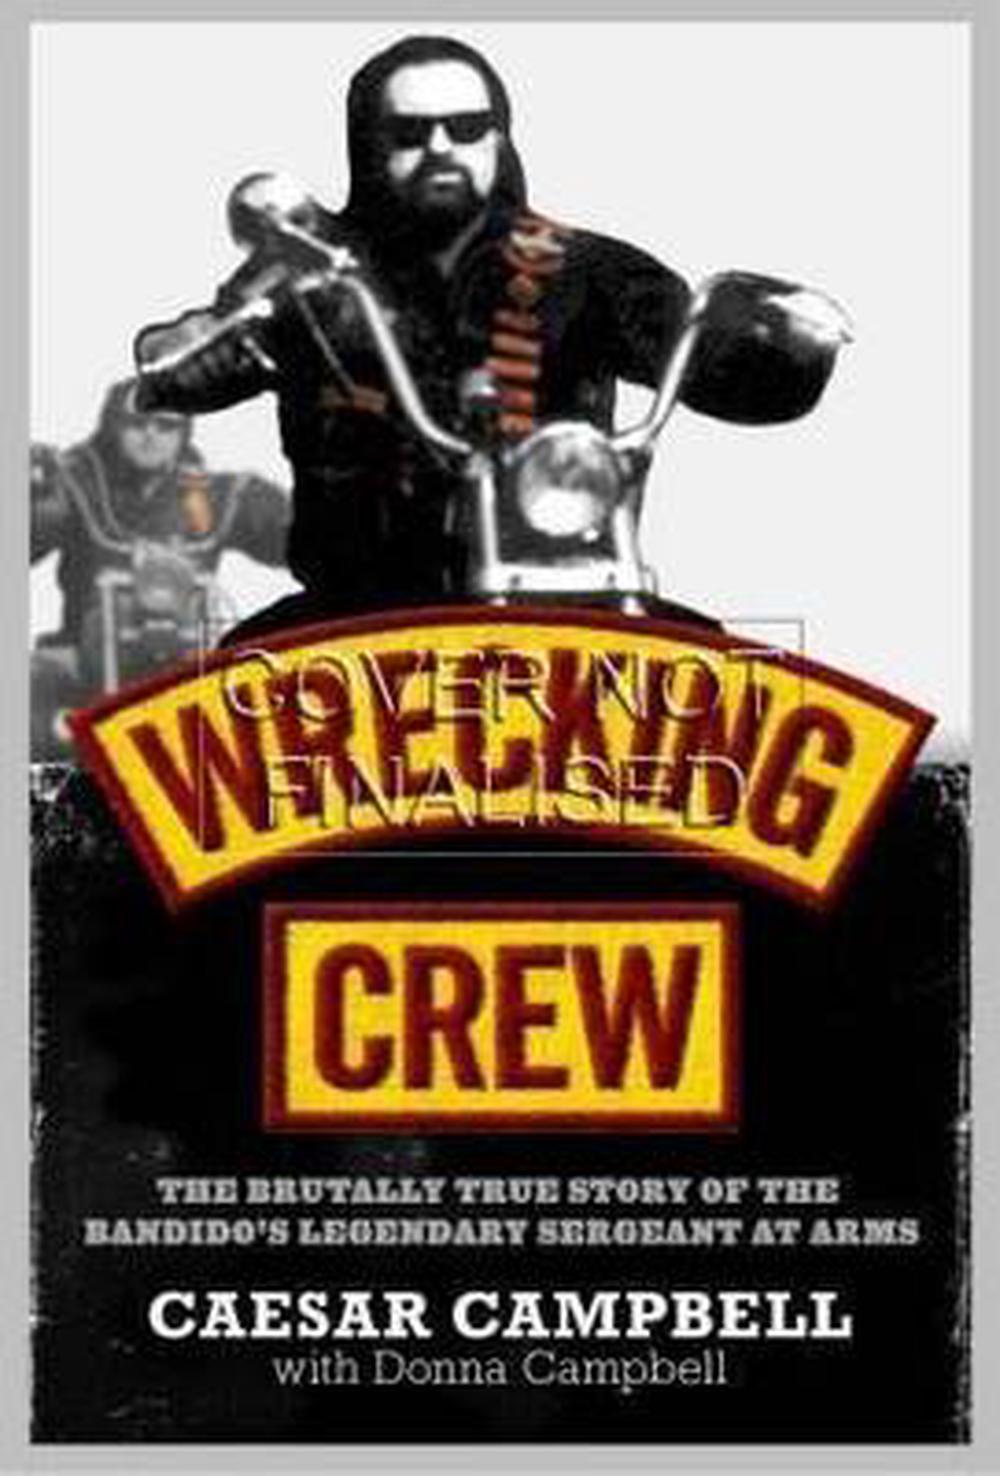 Wrecking Crew by Caesar Campbell, Paperback, 9781742610481 | Buy online ...